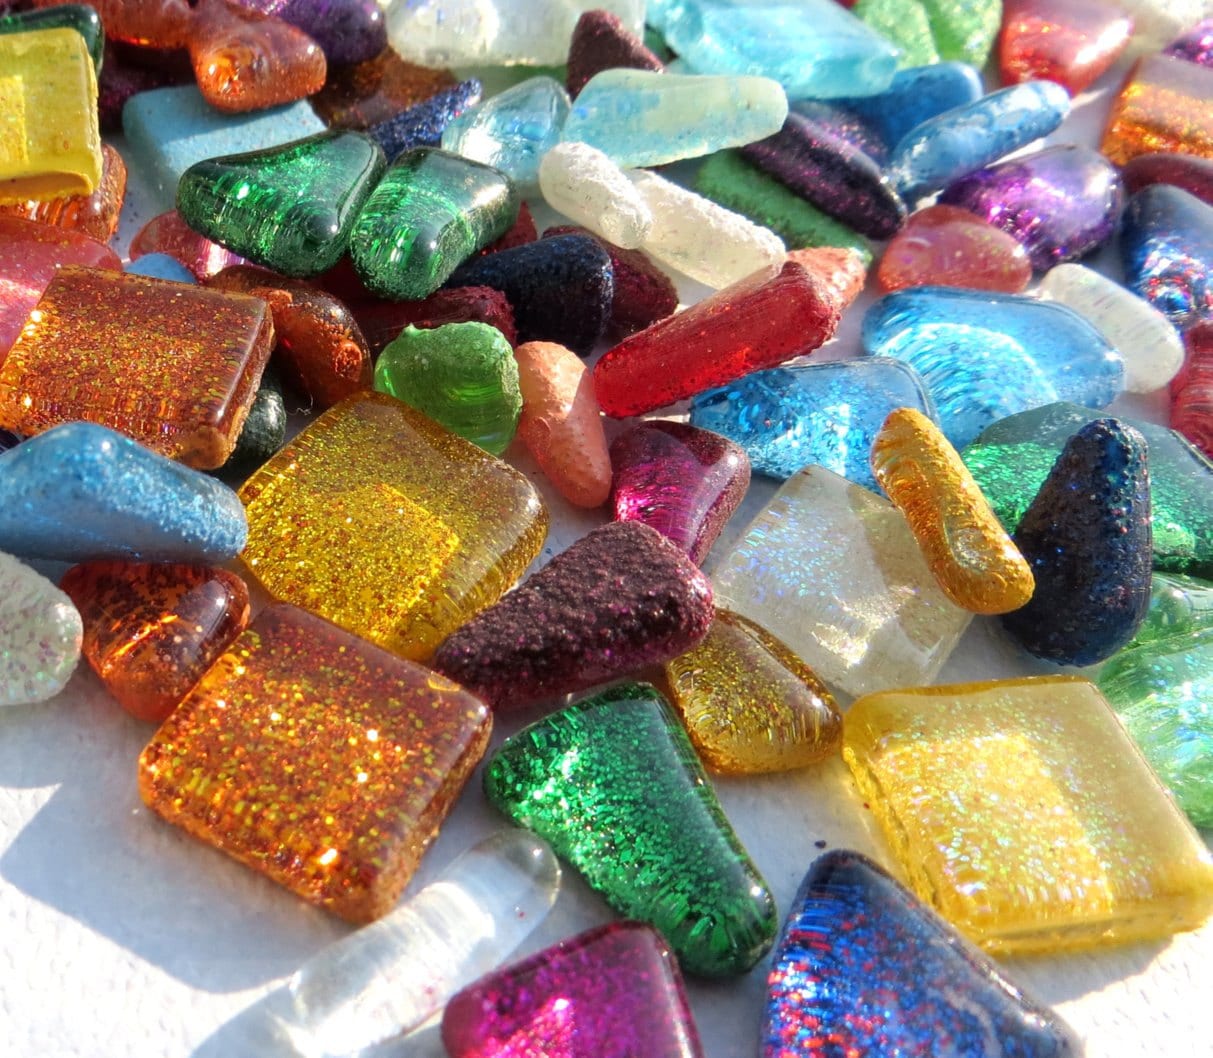 Glitter Puzzle Tiles - Assorted Shapes and Colors - Mosaic Tiles Glass - 100g- Random Geometric Shapes